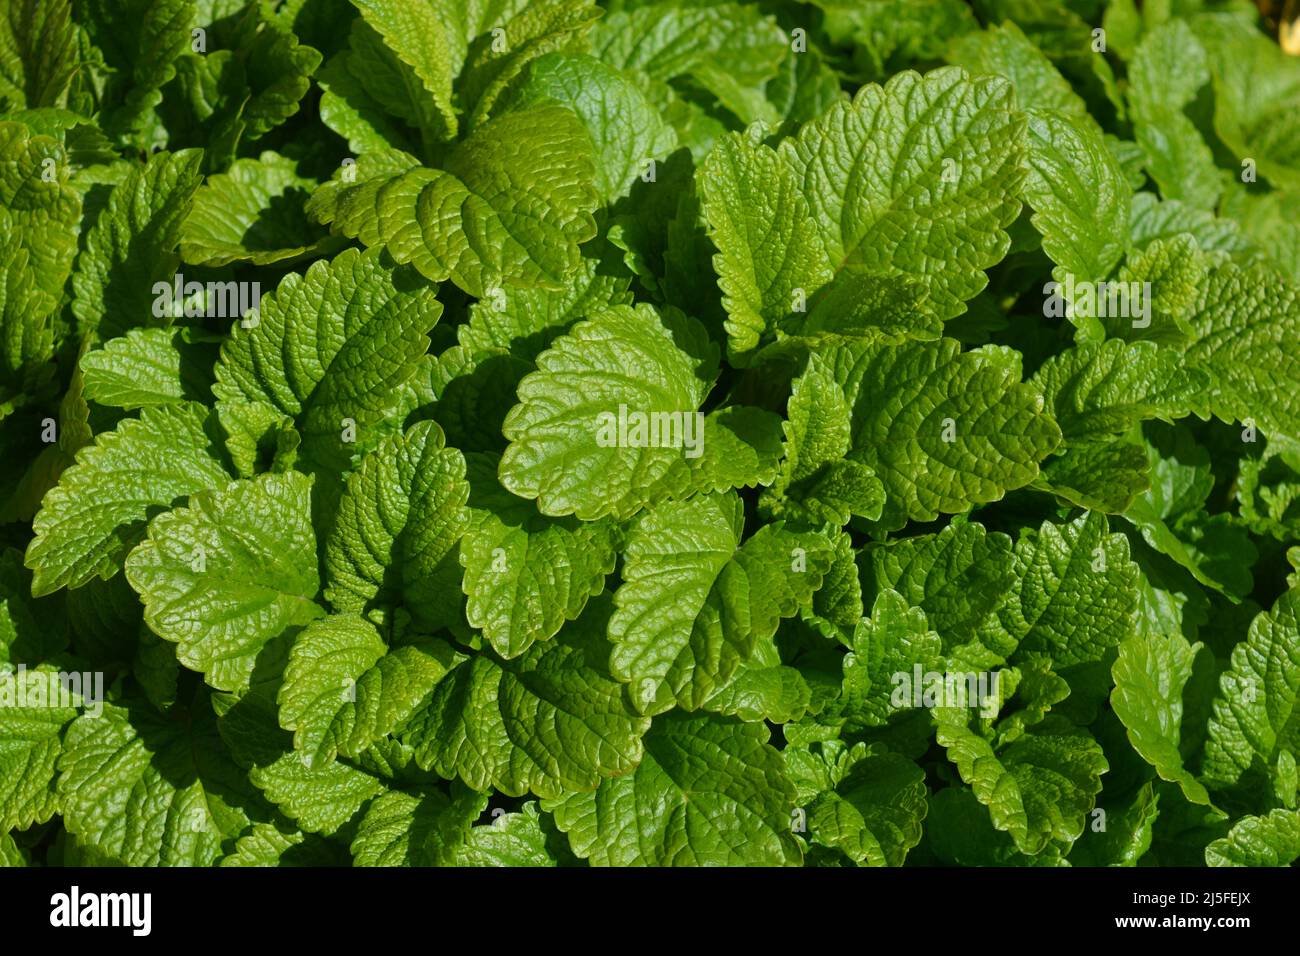 Fresh green leaves of Lemon Balm, also known as Melissa officinalis, a lemon scented herb Stock Photo